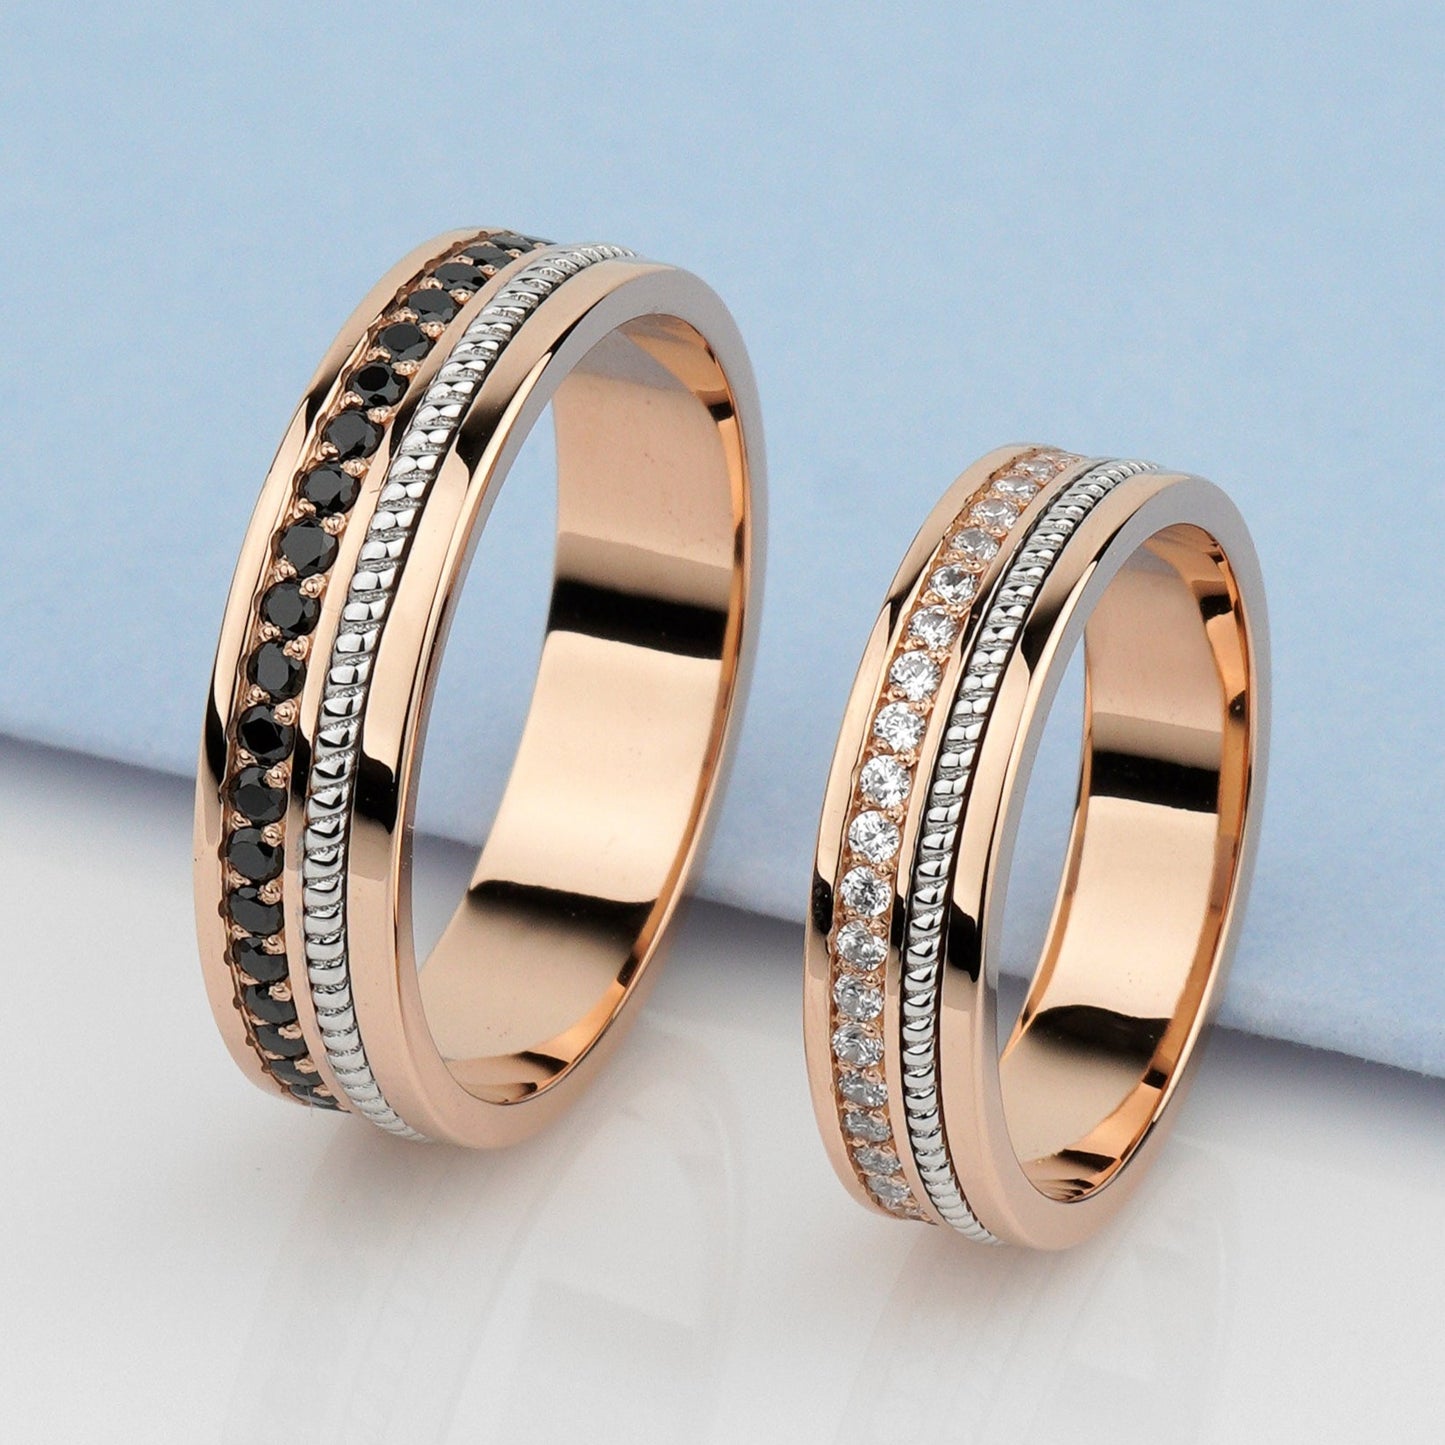 Gold wedding rings set with black and white diamonds. Unique wedding bands set. His and hers rings. Couple rings set. Unique gold bands. Unusual wedding rings. Matching wedding bands. Diamond gold bands